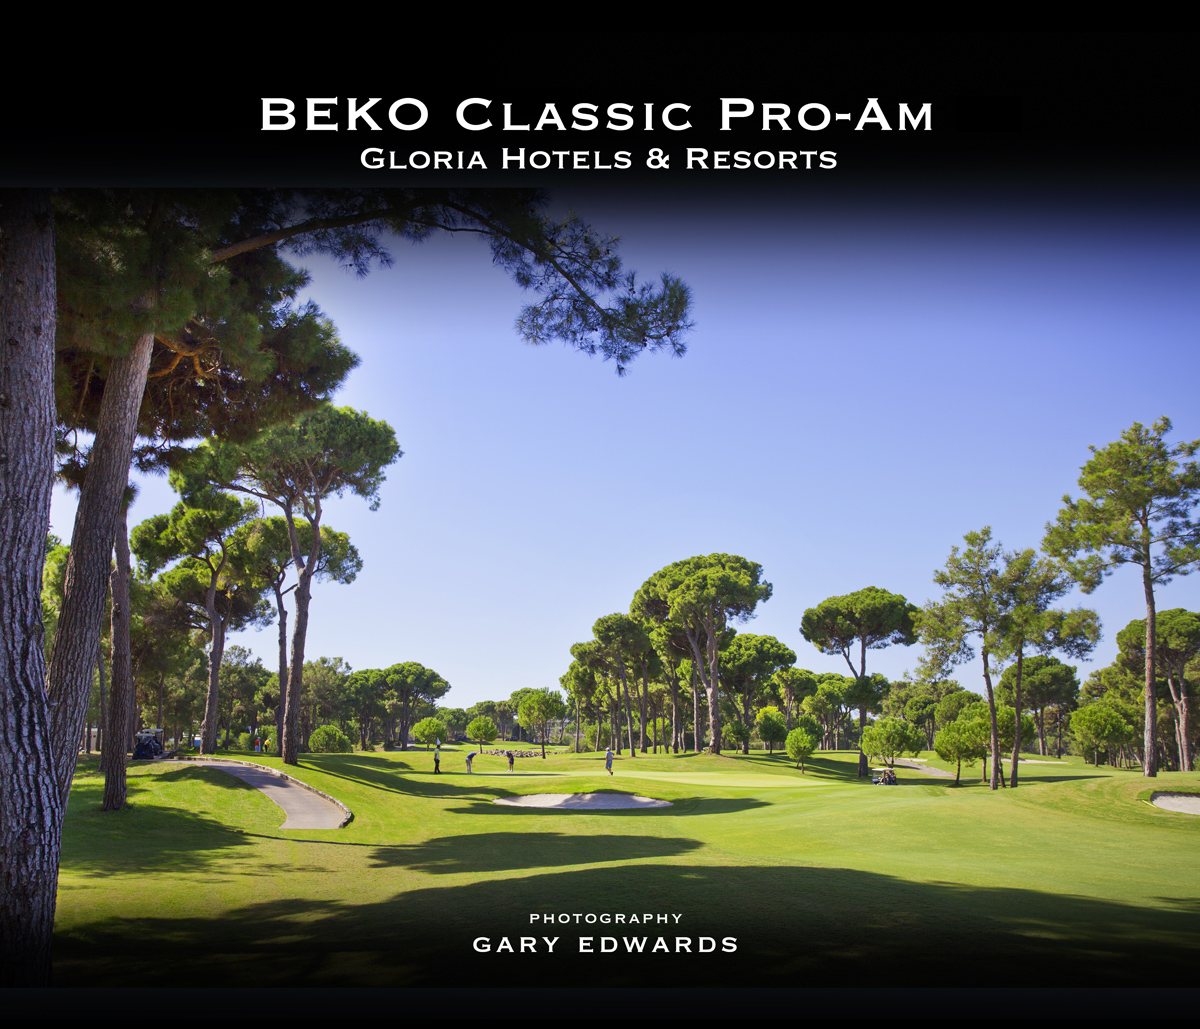 Event Book , Book Cover, Beko Classic Pro-Am, Coffee Table Book, Gary Edwards Photography Golf